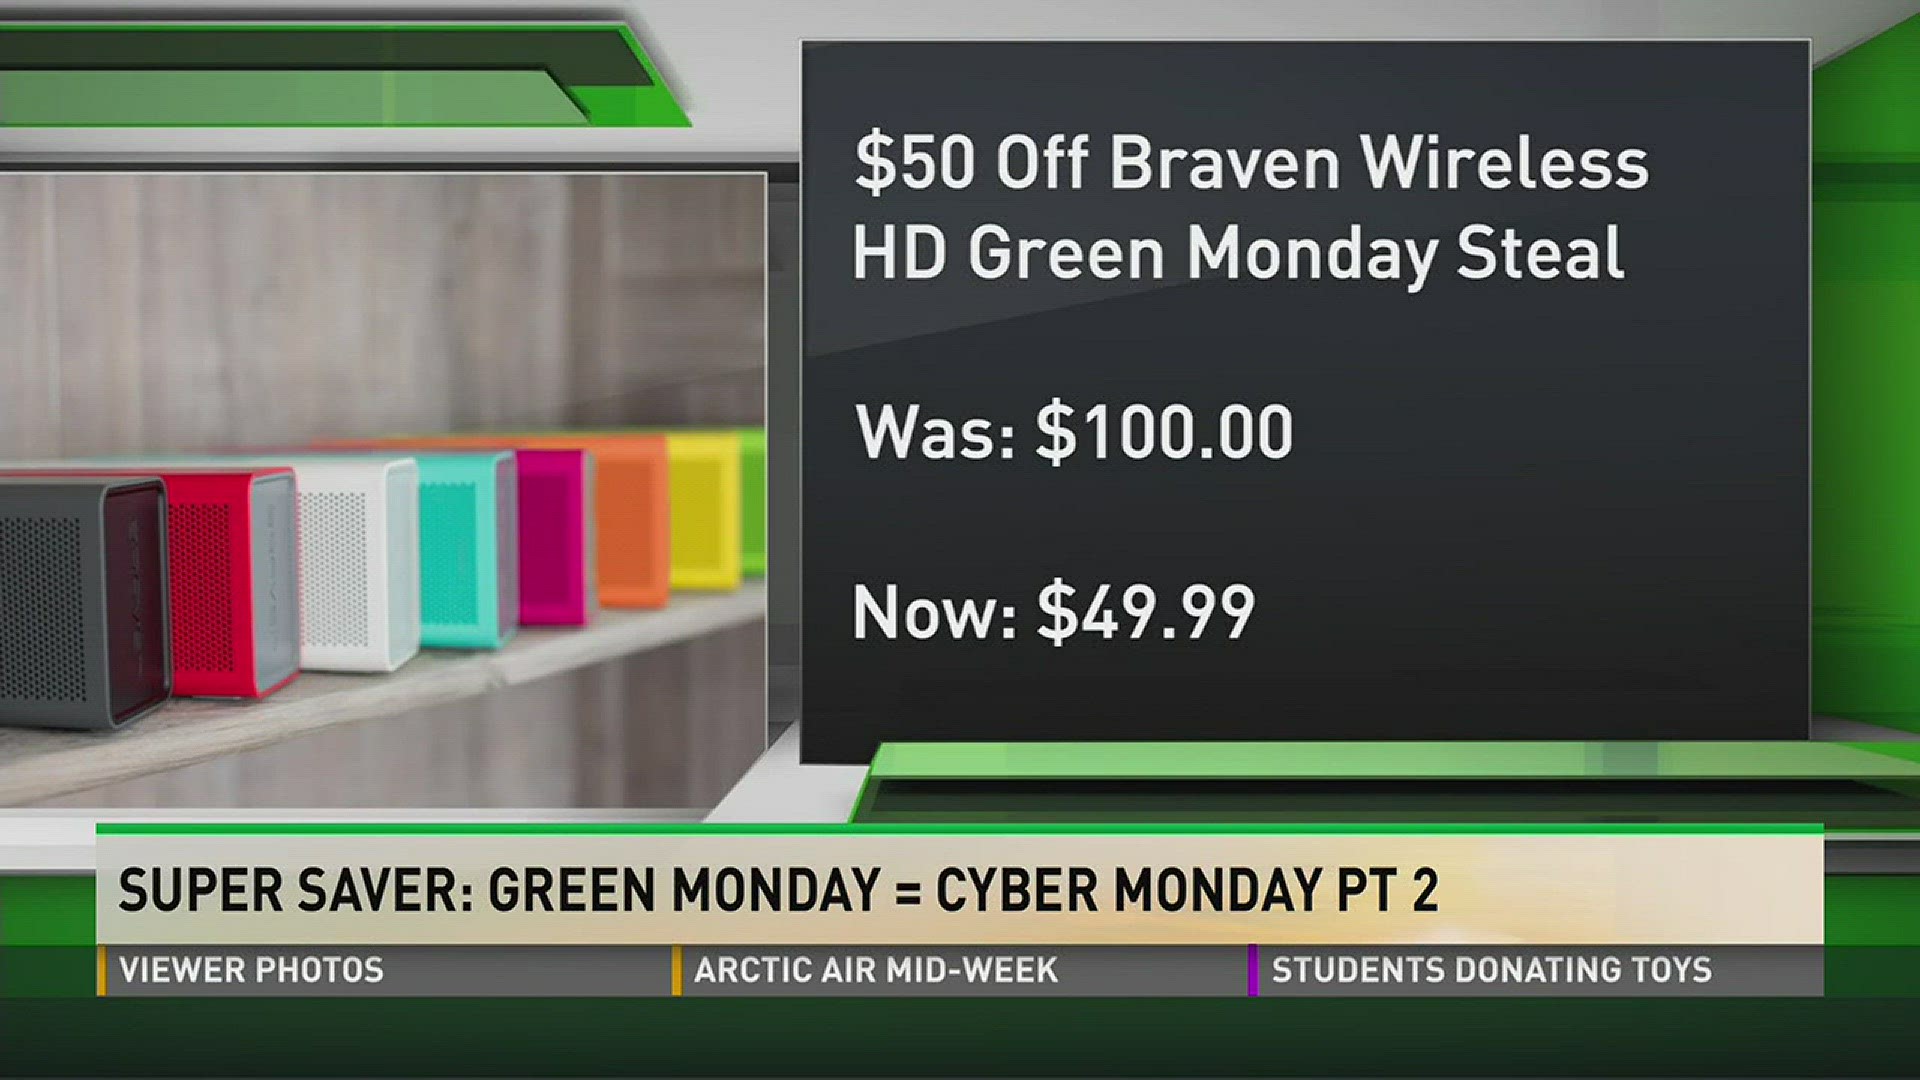 Matt Granite gives us a look at the third biggest deal day of the year -- Green Monday.